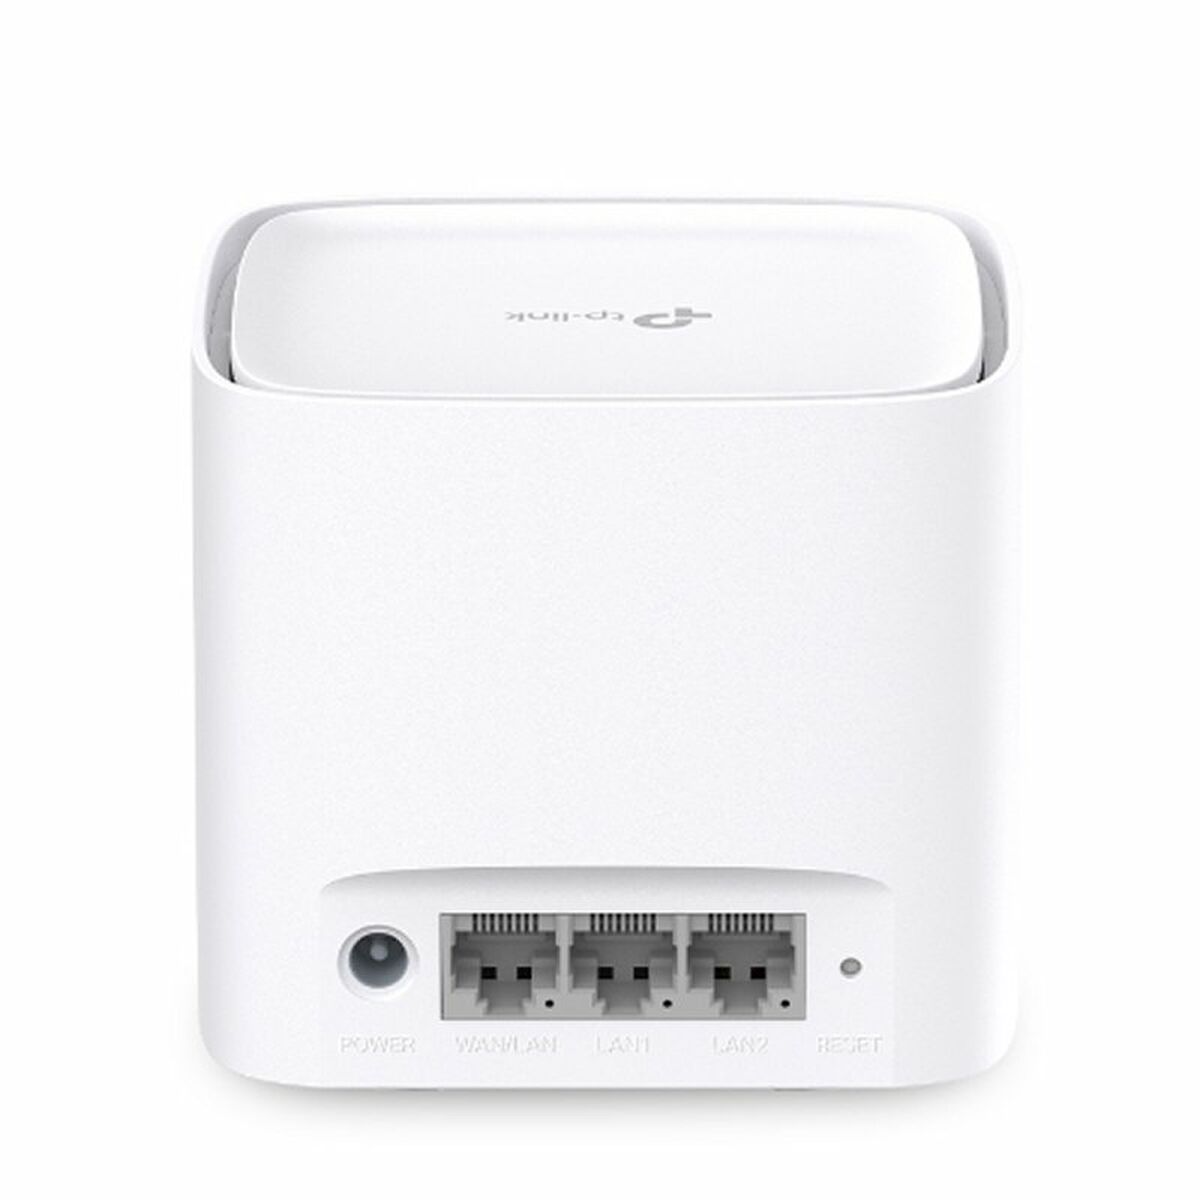 Access point TP-Link HC220-G5 White Black, TP-Link, Computing, Network devices, access-point-tp-link-hc220-g5-white-black, :867-1200 Mbps, Brand_TP-Link, category-reference-2609, category-reference-2803, category-reference-2820, category-reference-t-19685, category-reference-t-19914, Condition_NEW, hot deals, networks/wiring, Price_50 - 100, Teleworking, RiotNook